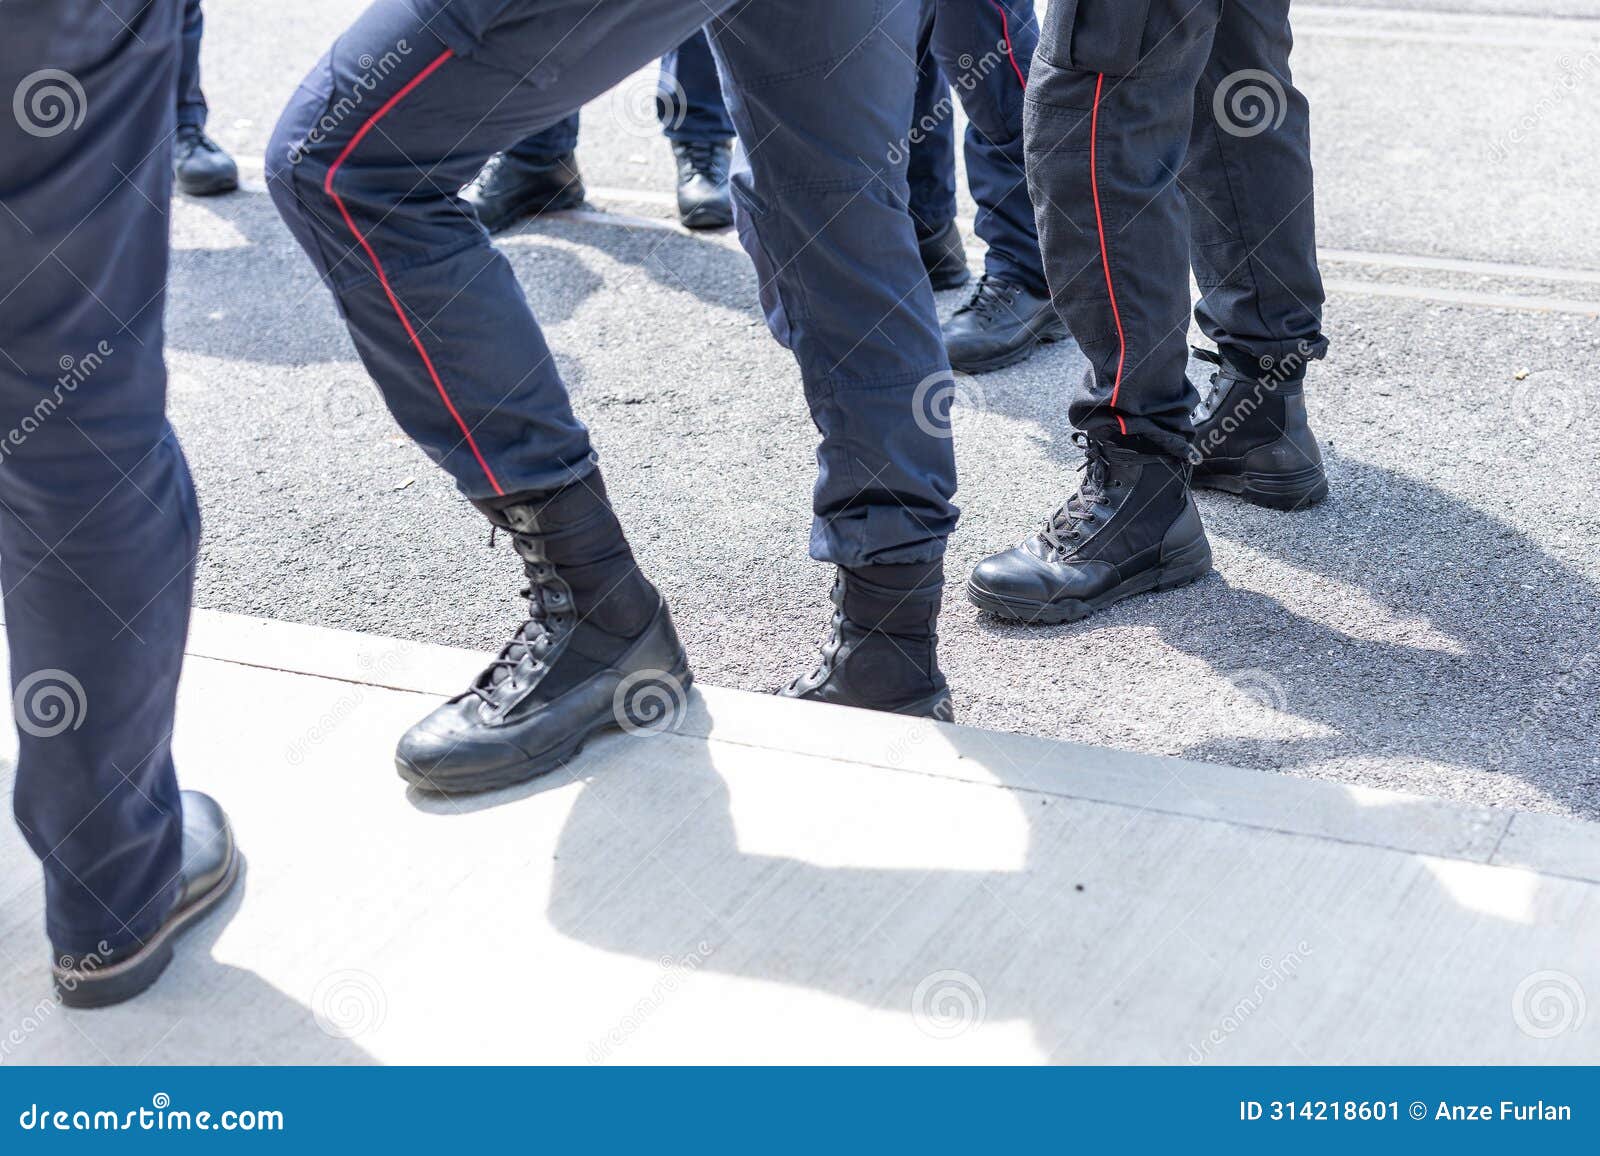 typical shoes of italian carabinieri police officers. leather shoes on feet of police unit in italy.. police shoewear